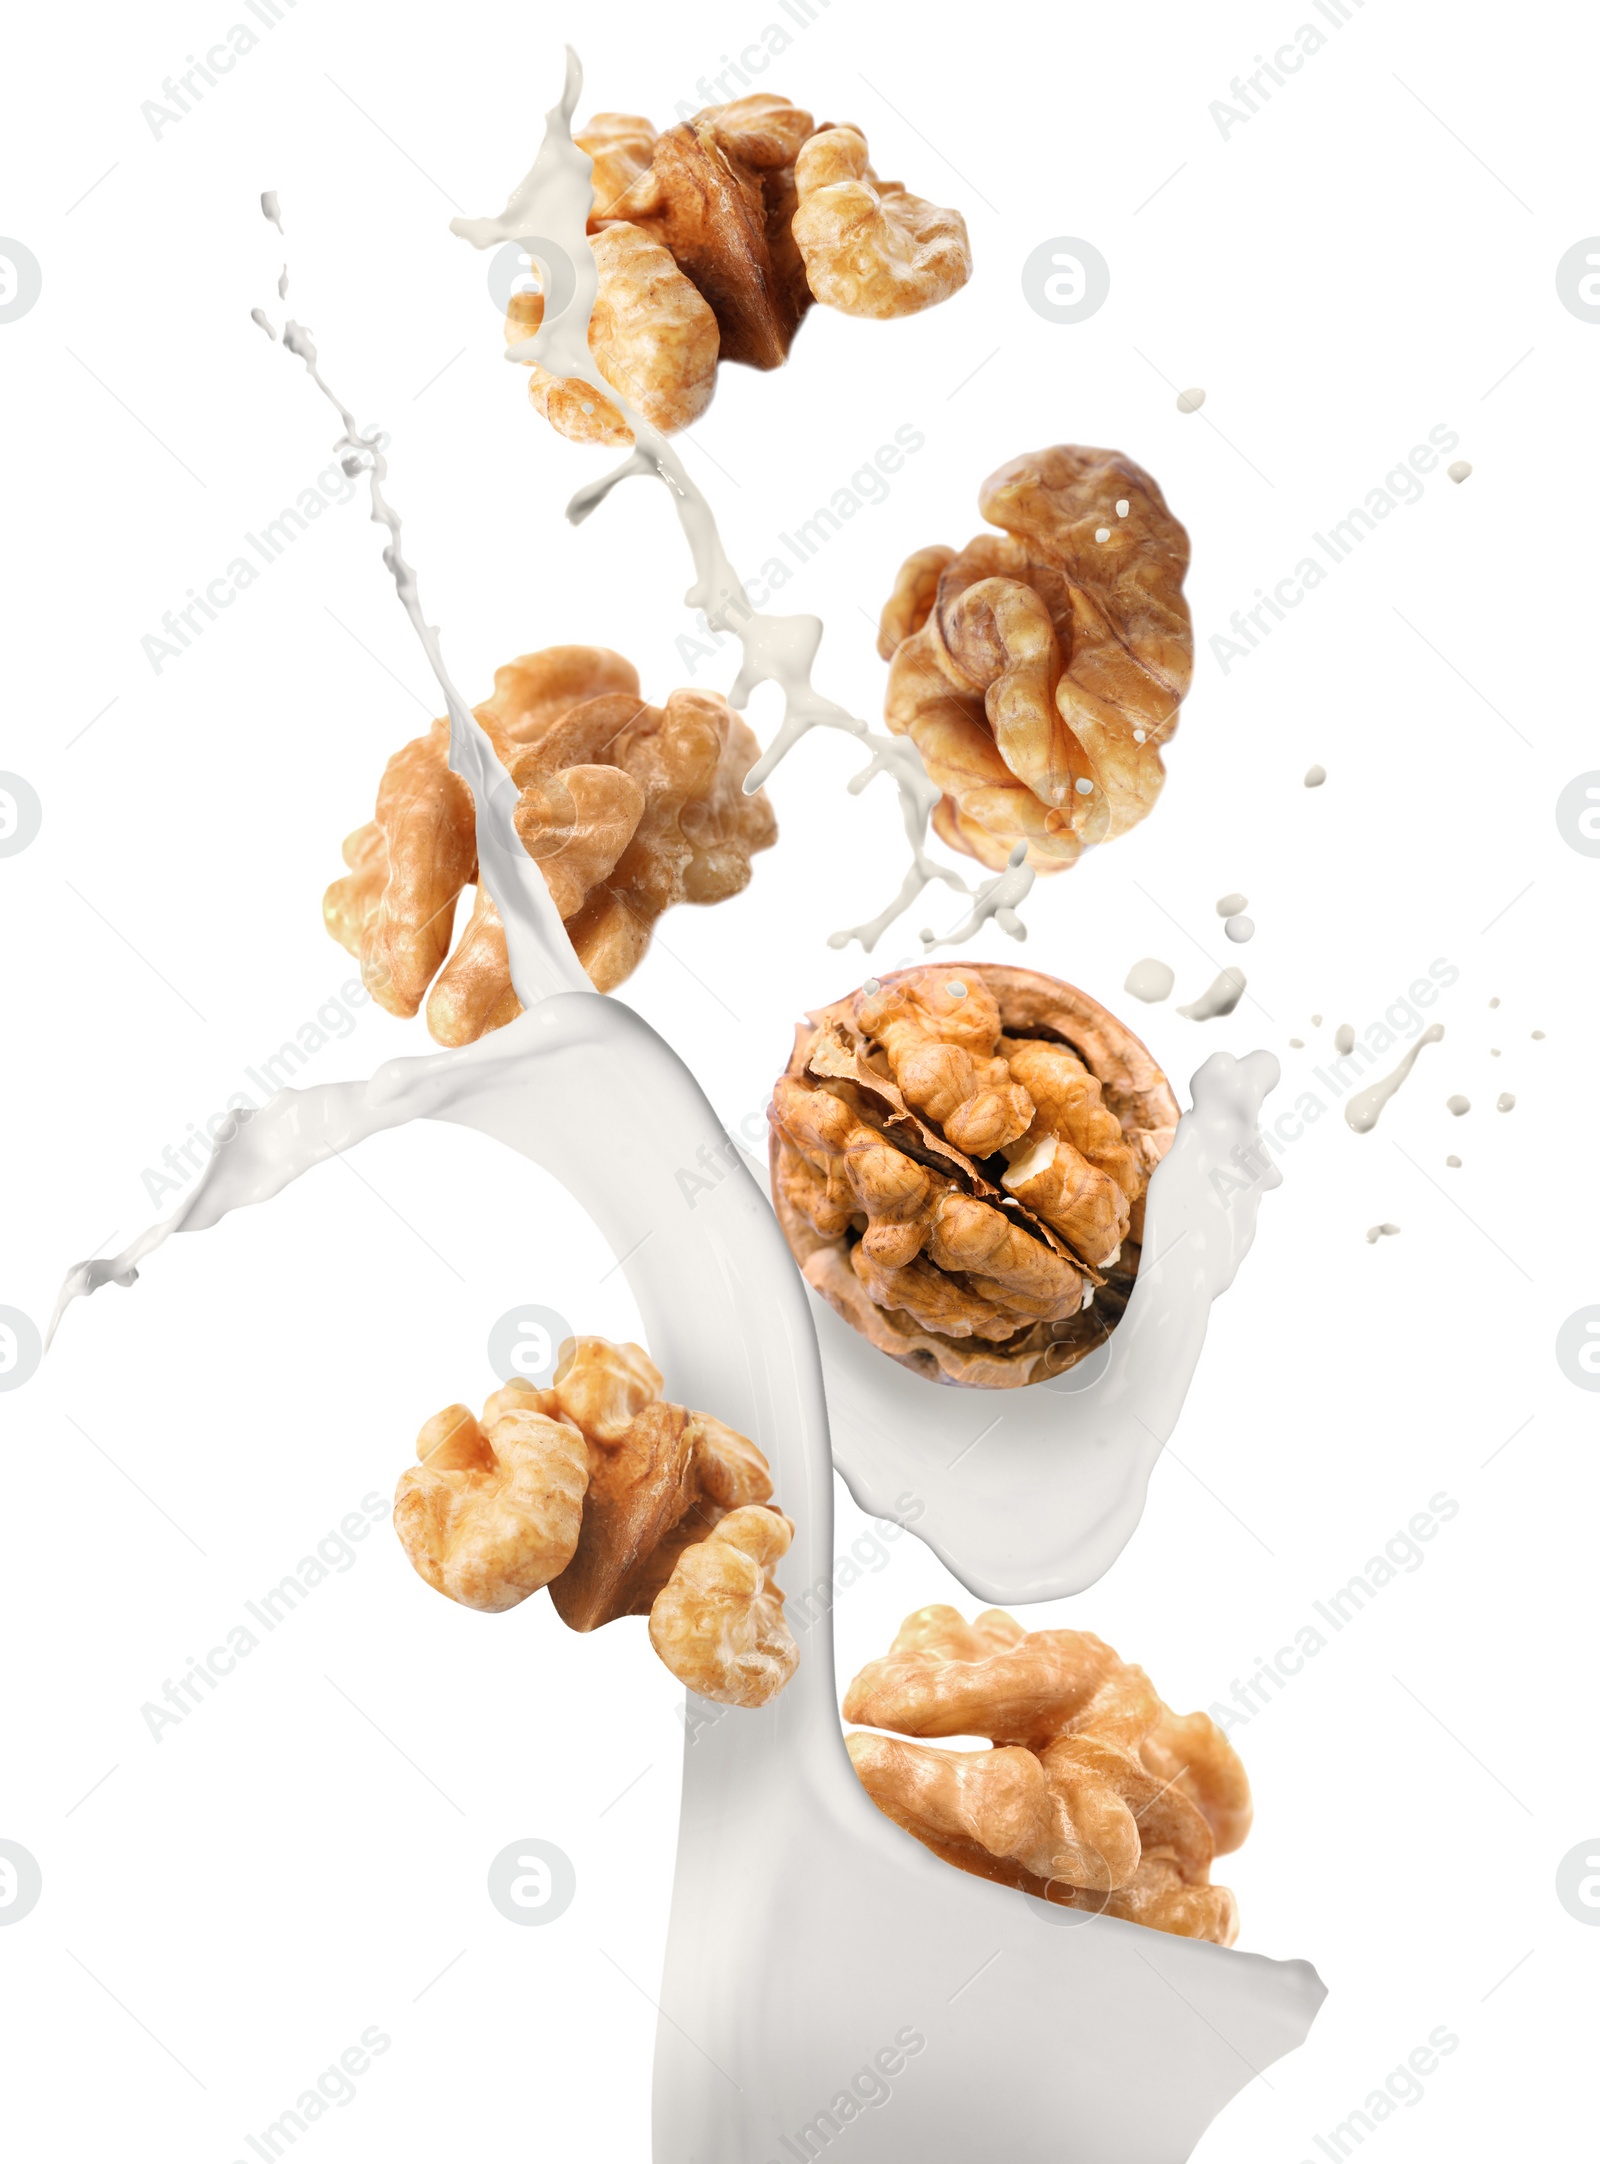 Image of Delicious walnut milk and nuts on white background